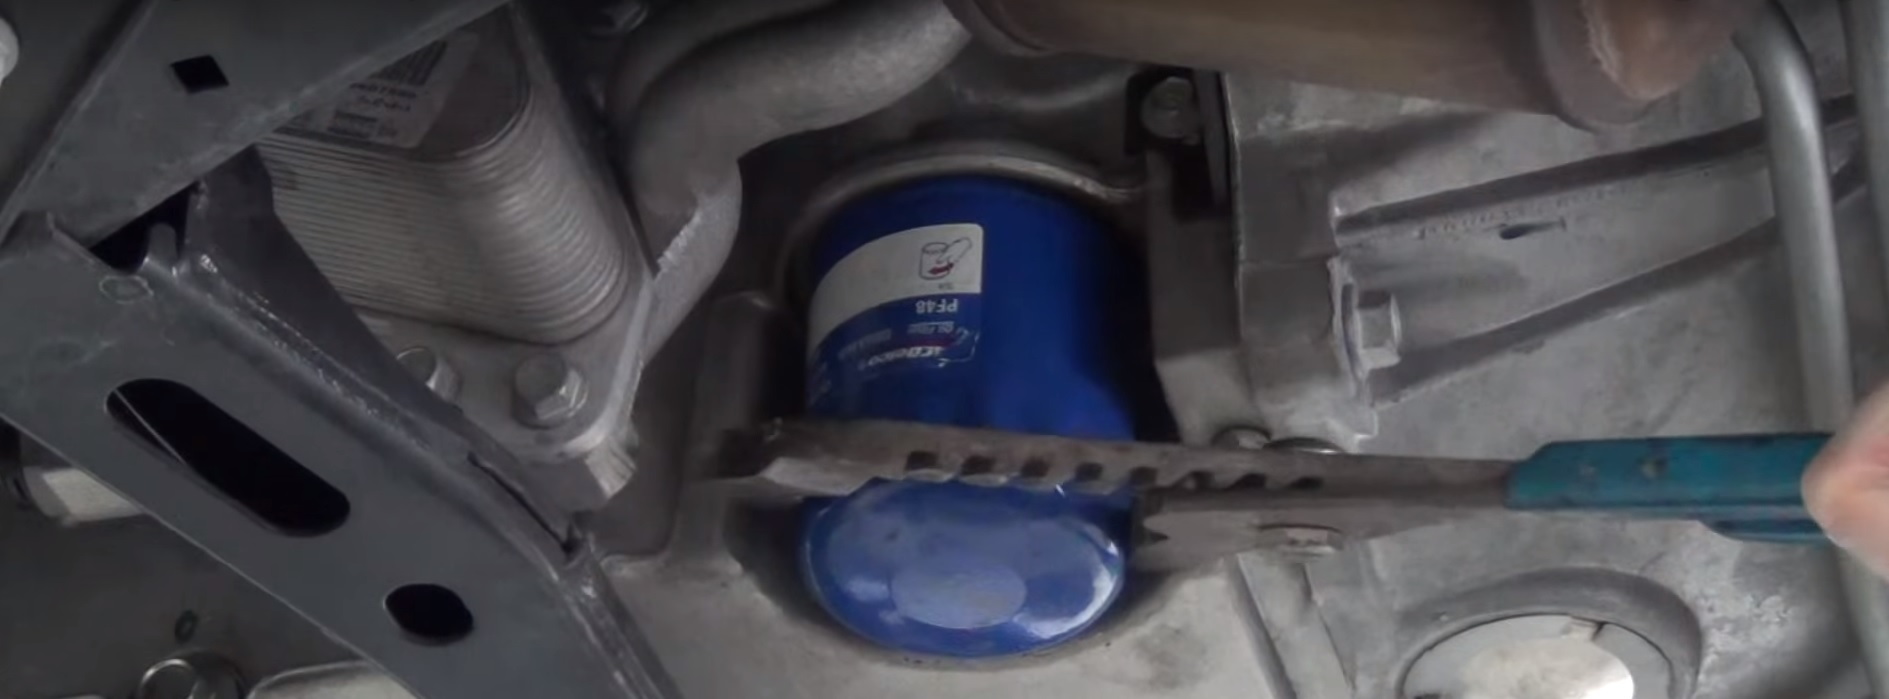 Remove the old oil filter